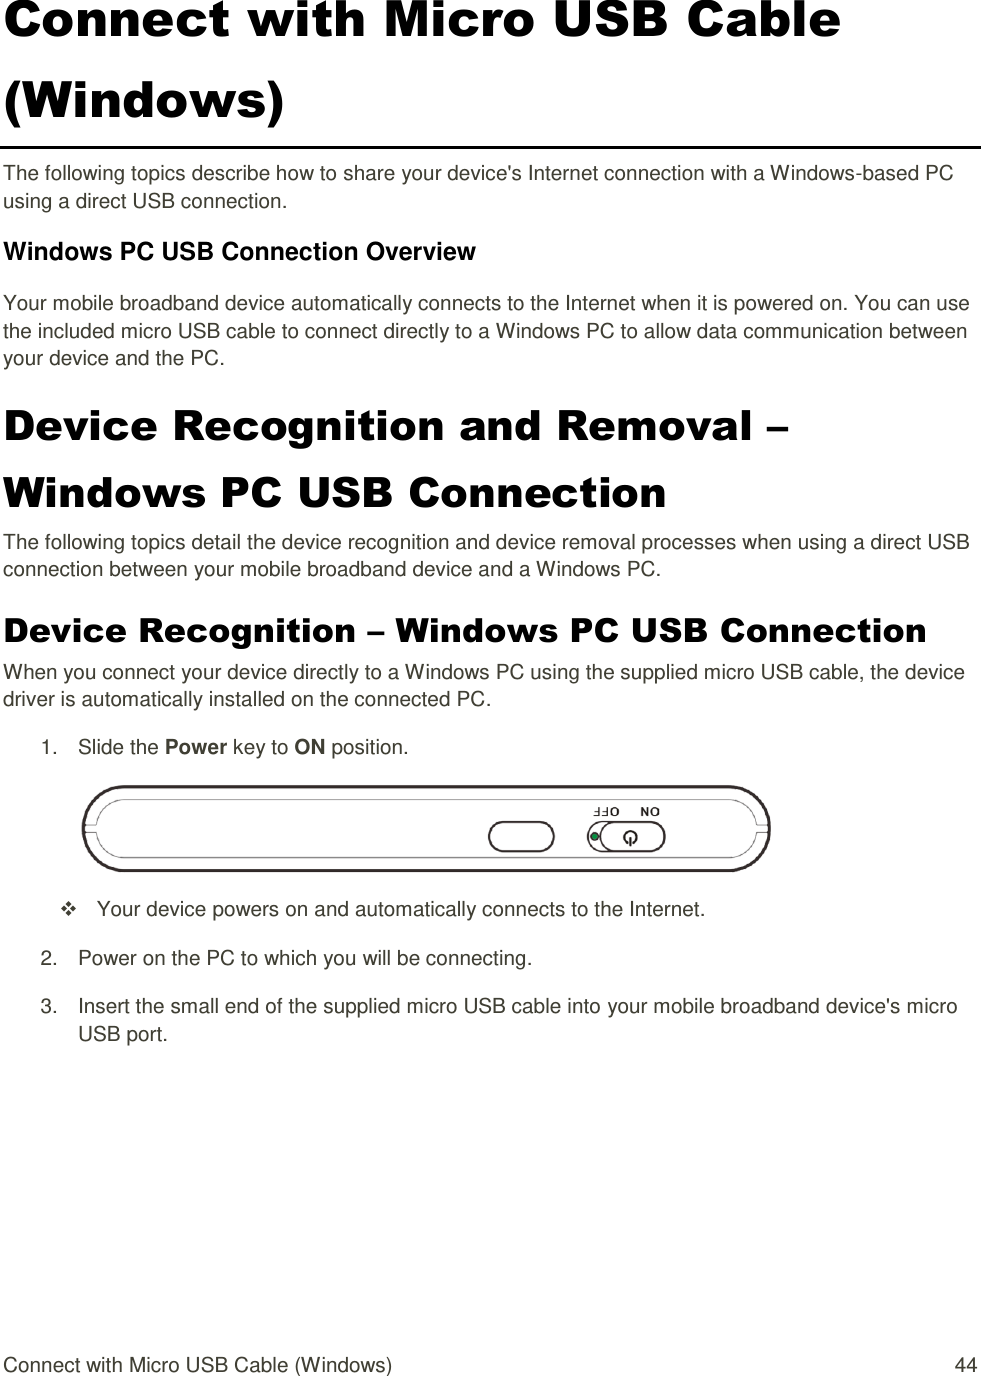 Connect with Micro USB Cable (Windows)  44 Connect with Micro USB Cable (Windows) The following topics describe how to share your device&apos;s Internet connection with a Windows-based PC using a direct USB connection. Windows PC USB Connection Overview Your mobile broadband device automatically connects to the Internet when it is powered on. You can use the included micro USB cable to connect directly to a Windows PC to allow data communication between your device and the PC.  Device Recognition and Removal – Windows PC USB Connection The following topics detail the device recognition and device removal processes when using a direct USB connection between your mobile broadband device and a Windows PC. Device Recognition – Windows PC USB Connection When you connect your device directly to a Windows PC using the supplied micro USB cable, the device driver is automatically installed on the connected PC. 1.  Slide the Power key to ON position.    Your device powers on and automatically connects to the Internet. 2.  Power on the PC to which you will be connecting. 3.  Insert the small end of the supplied micro USB cable into your mobile broadband device&apos;s micro USB port. 